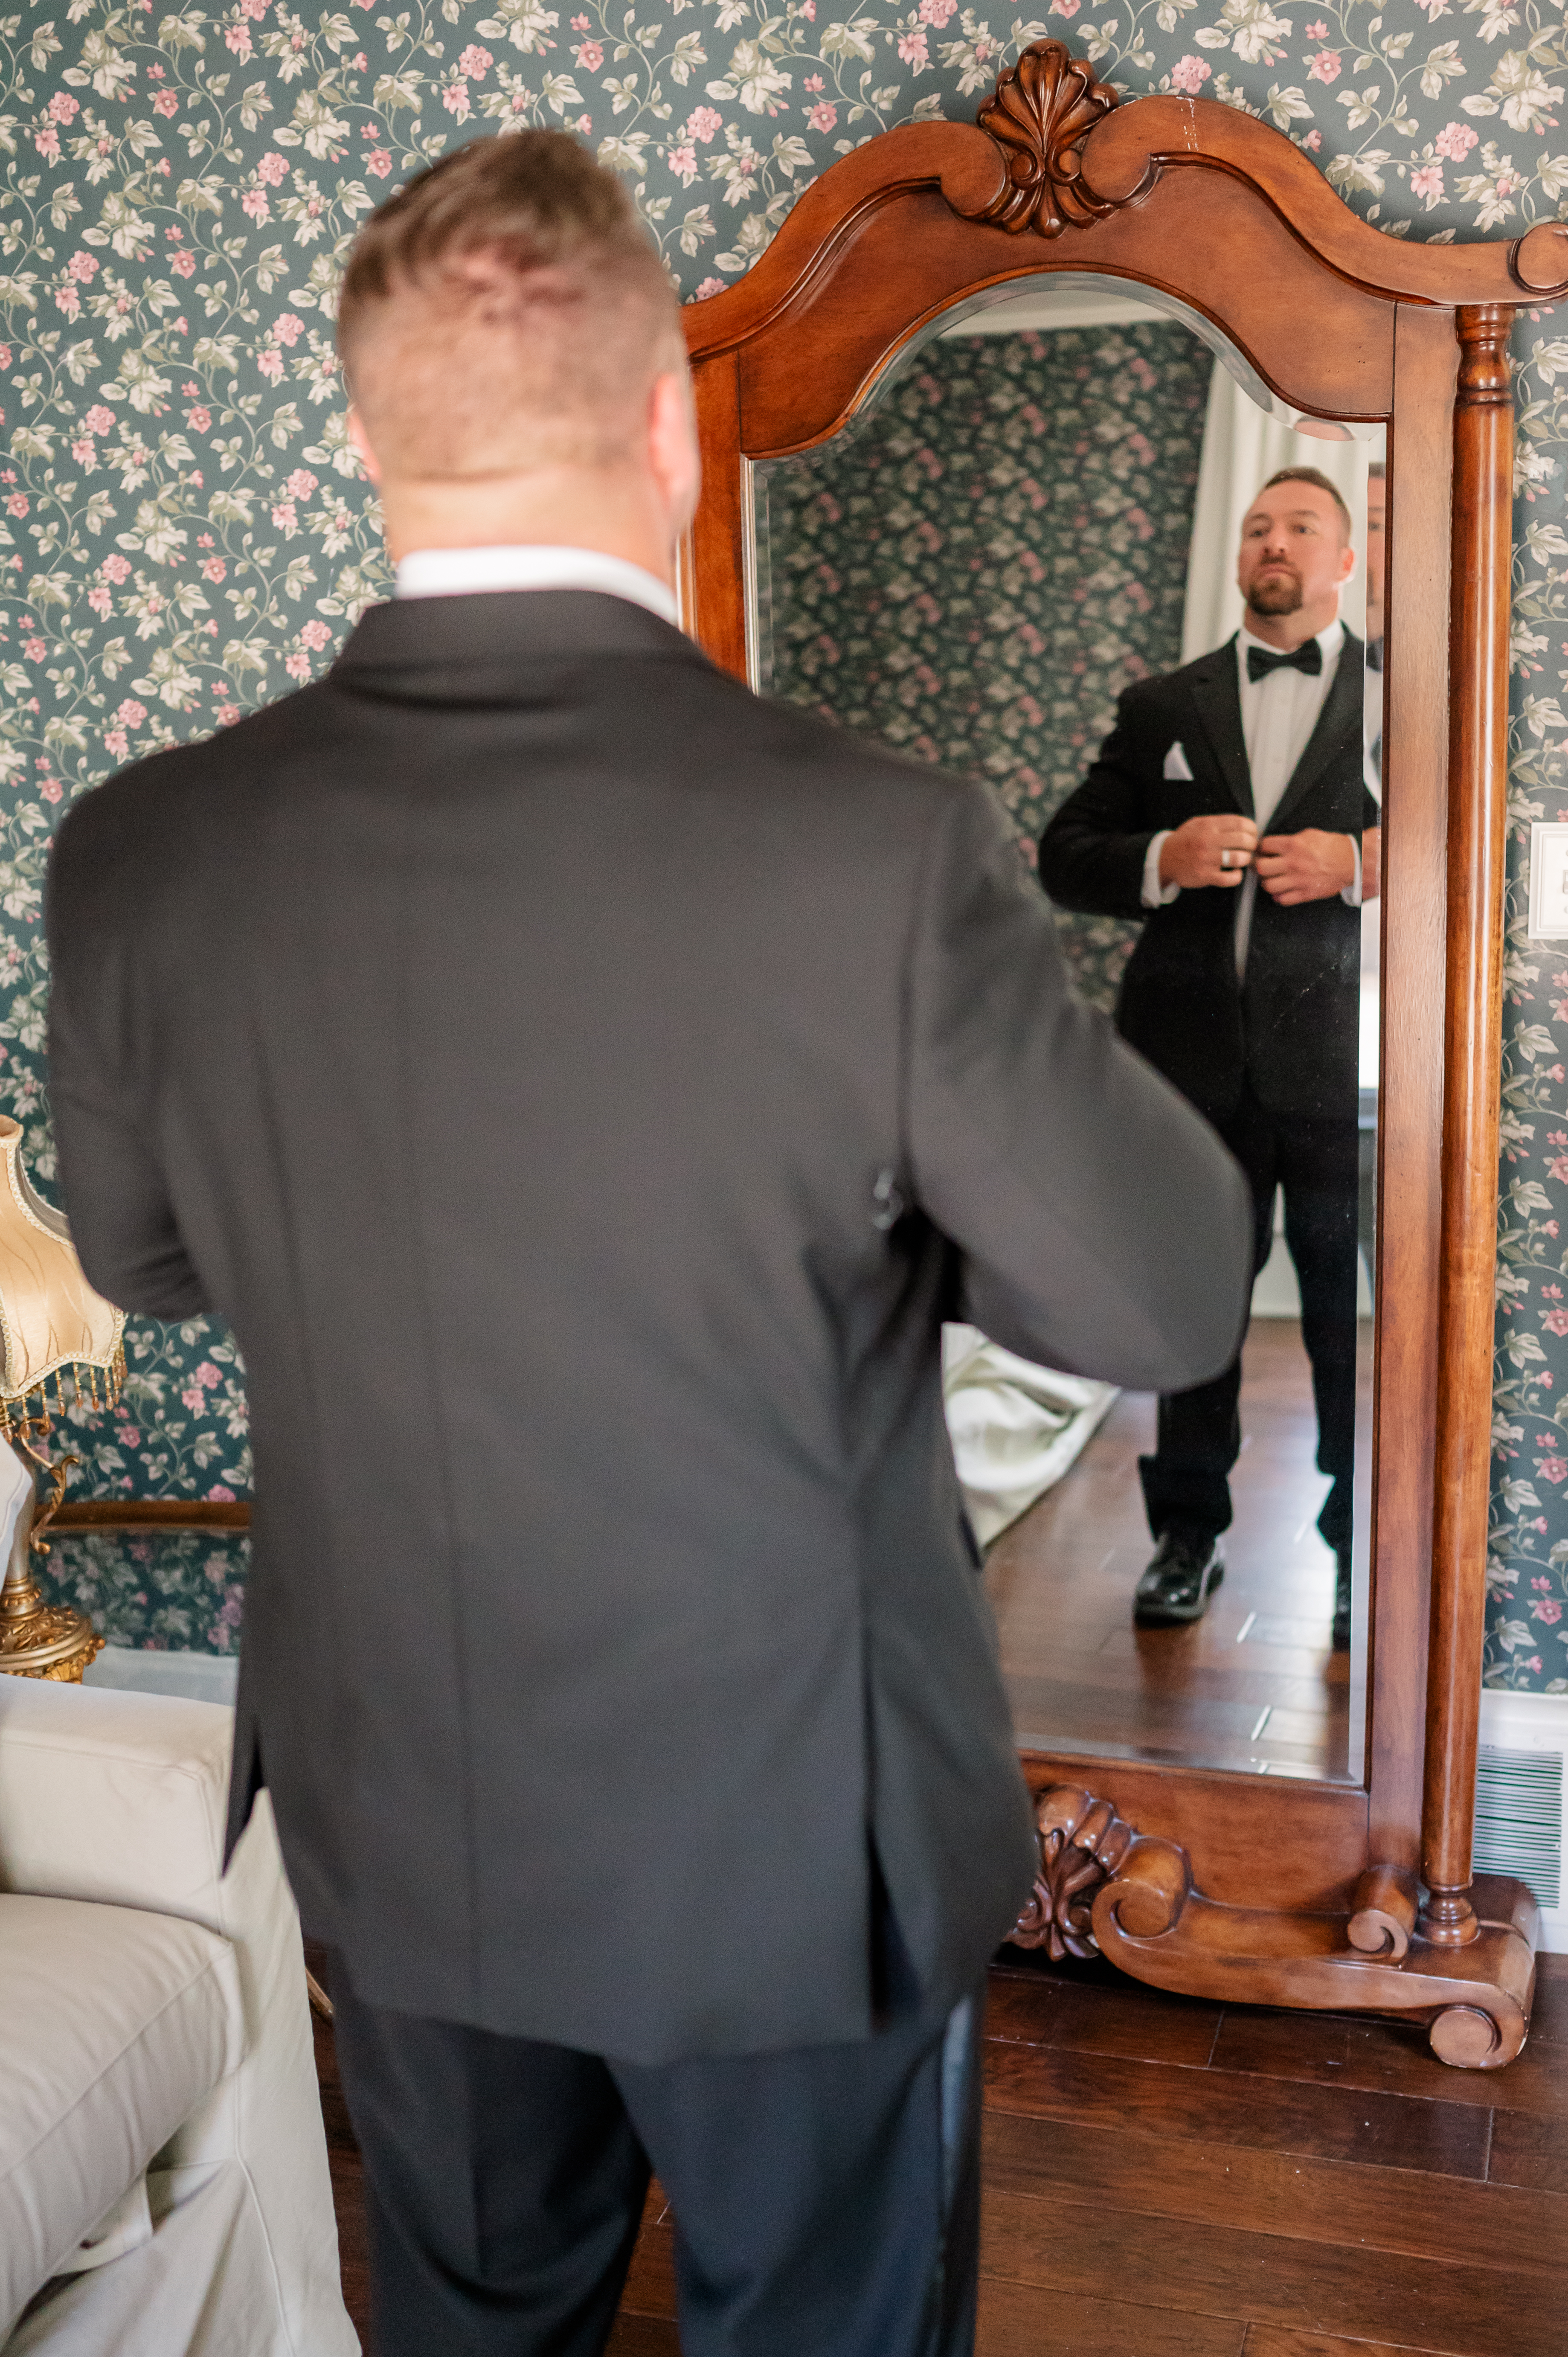 Captured in a candid moment as he carefully buttons up his attire in anticipation of the wedding ceremony.